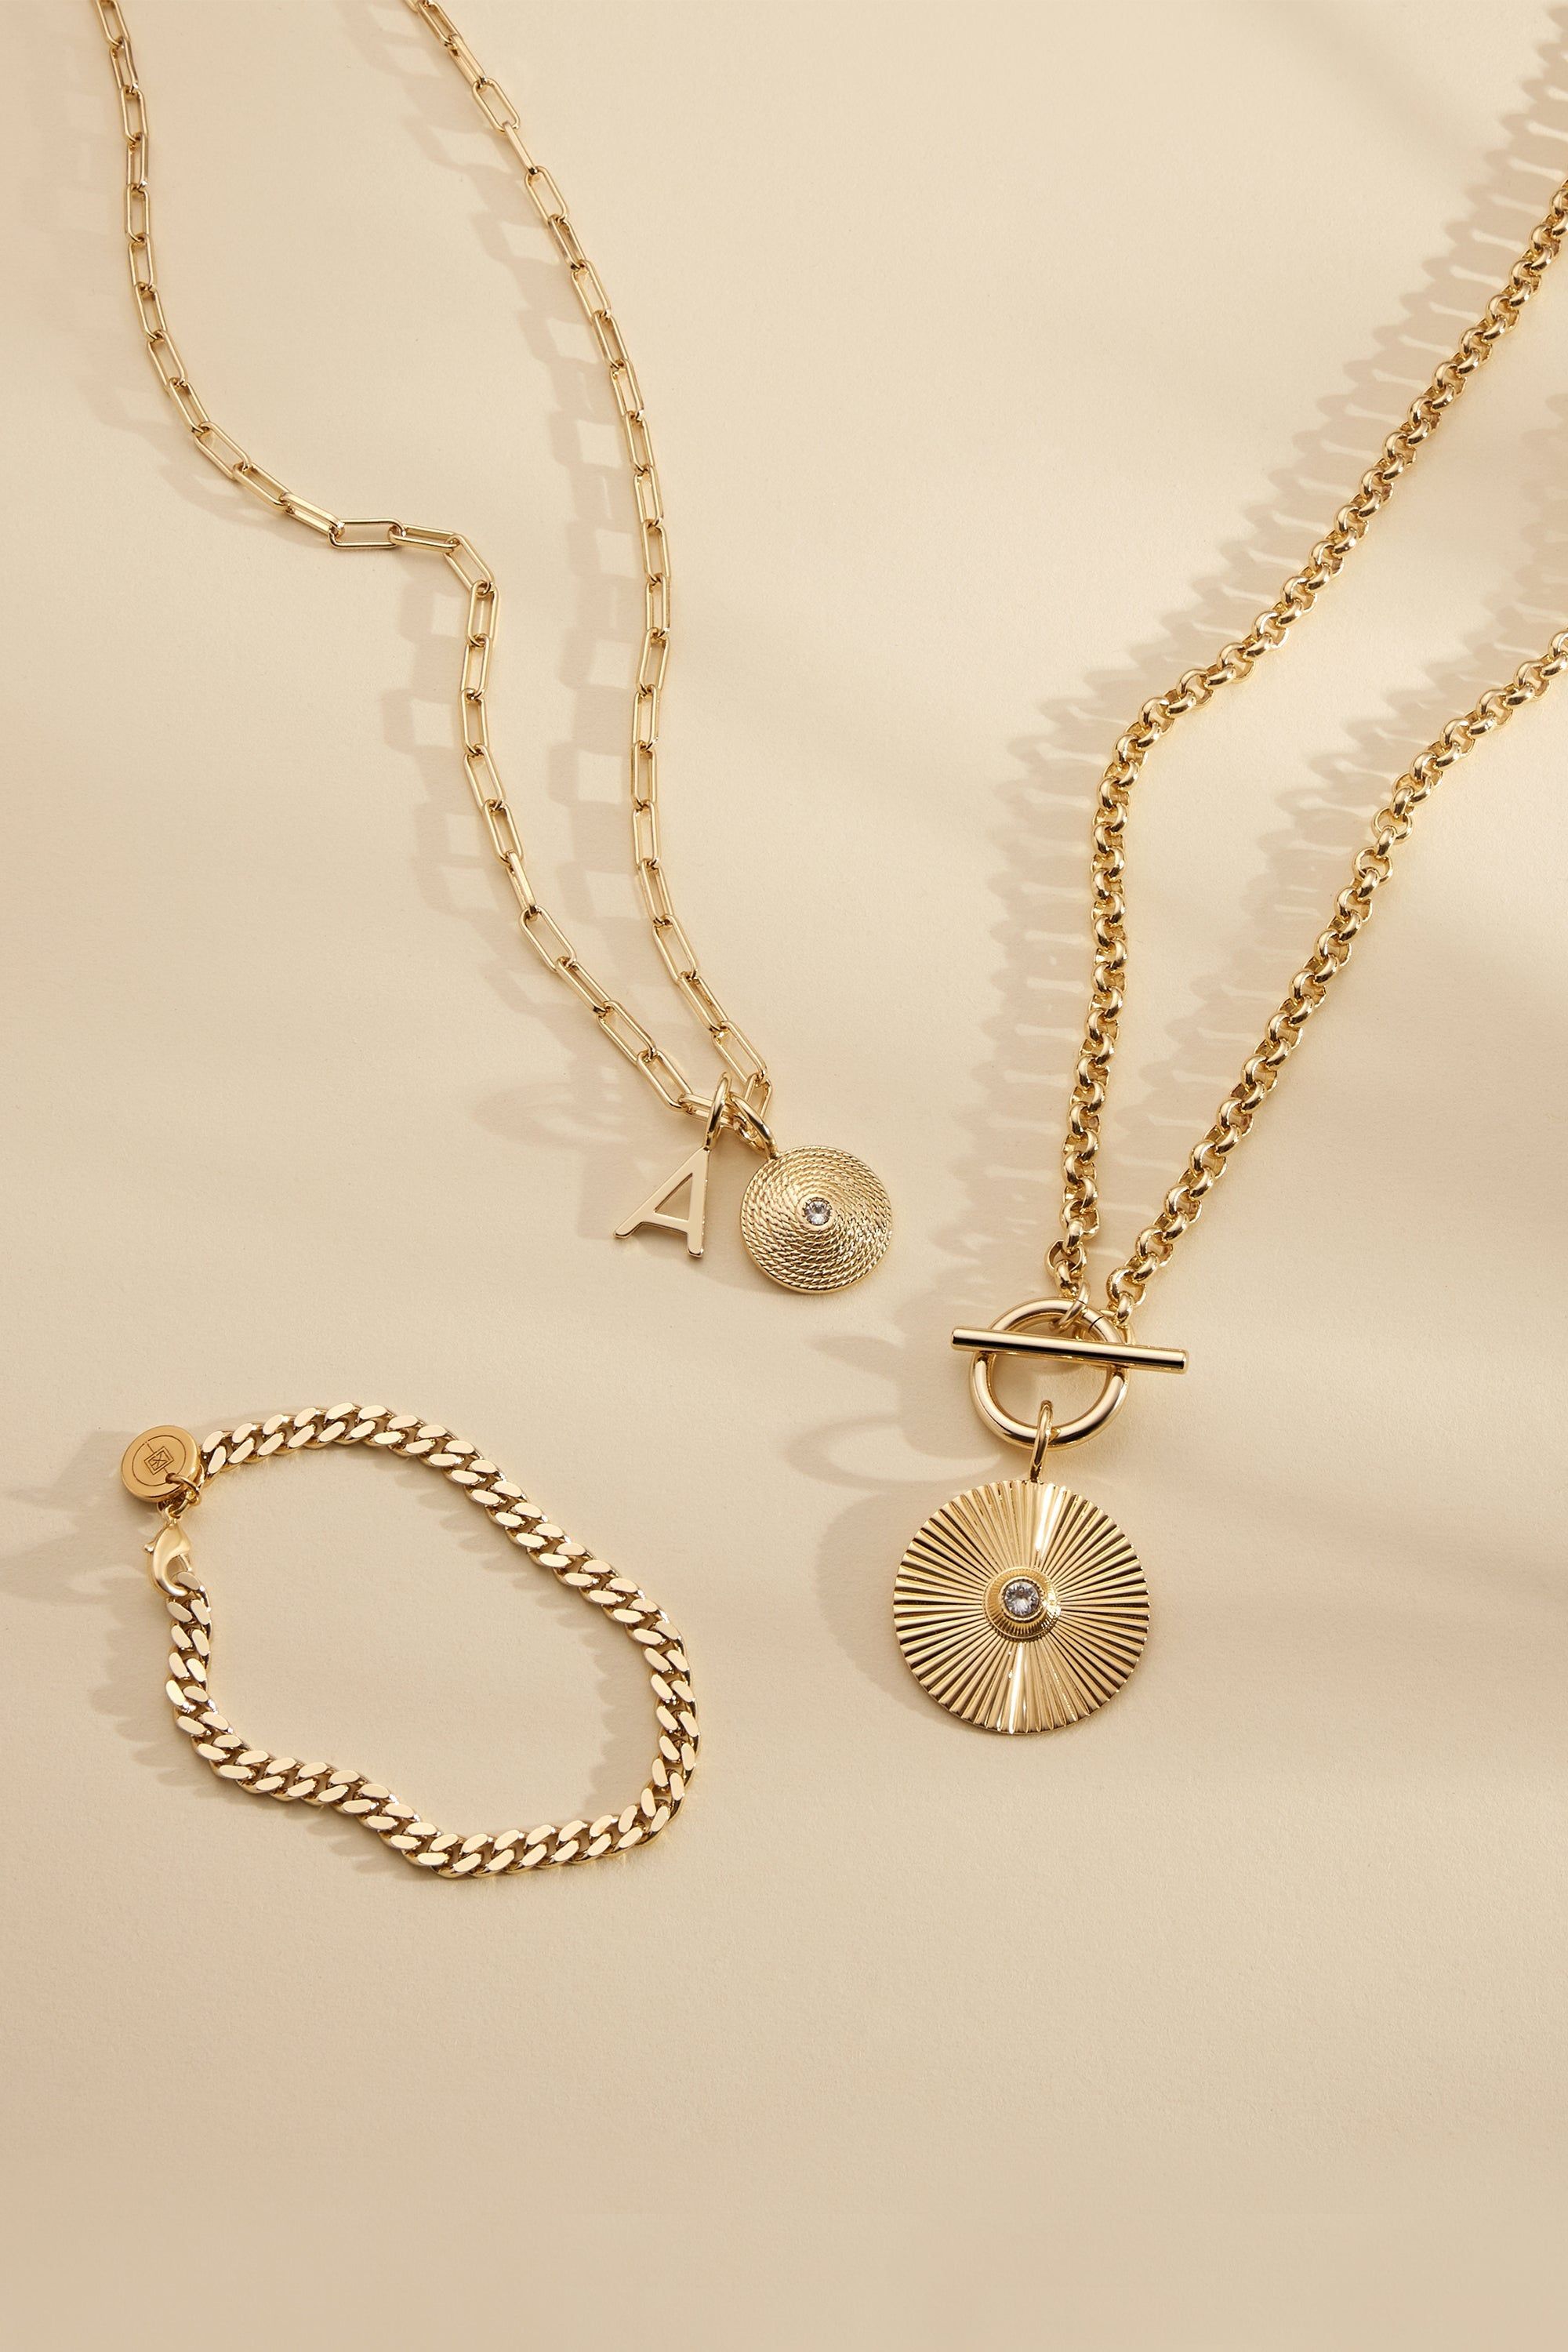 three different necklaces on a white surface